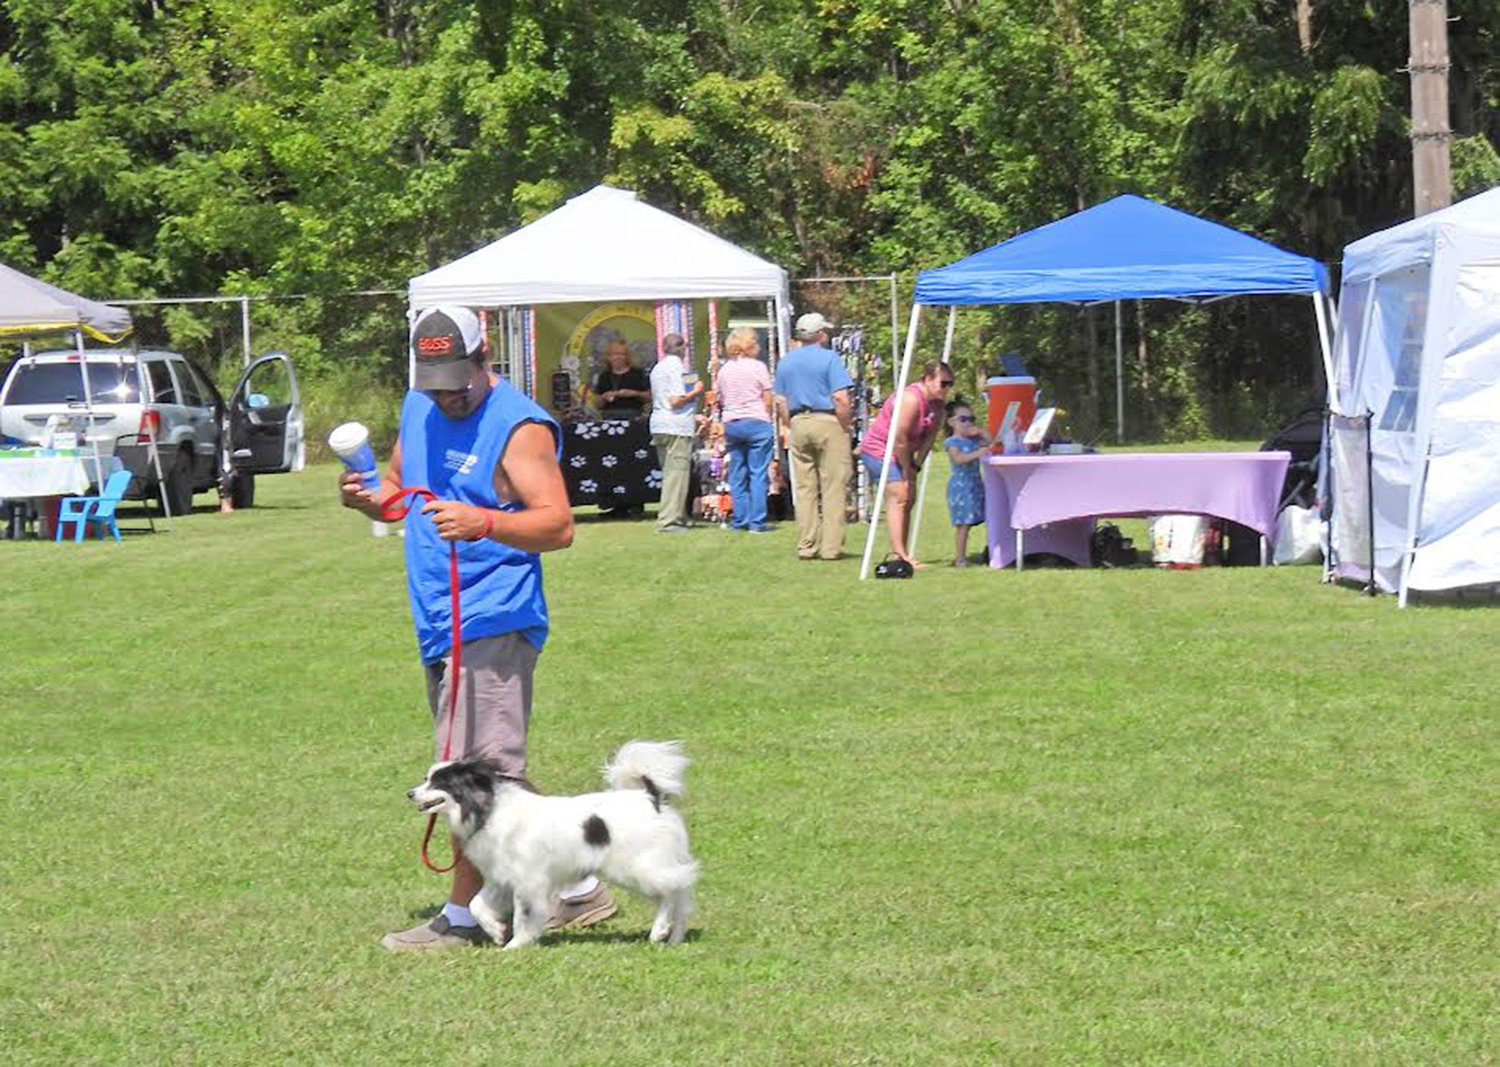 Both humans and canines took part in a previous Woofstock hosted by Wanderers' Rest Humane Association.